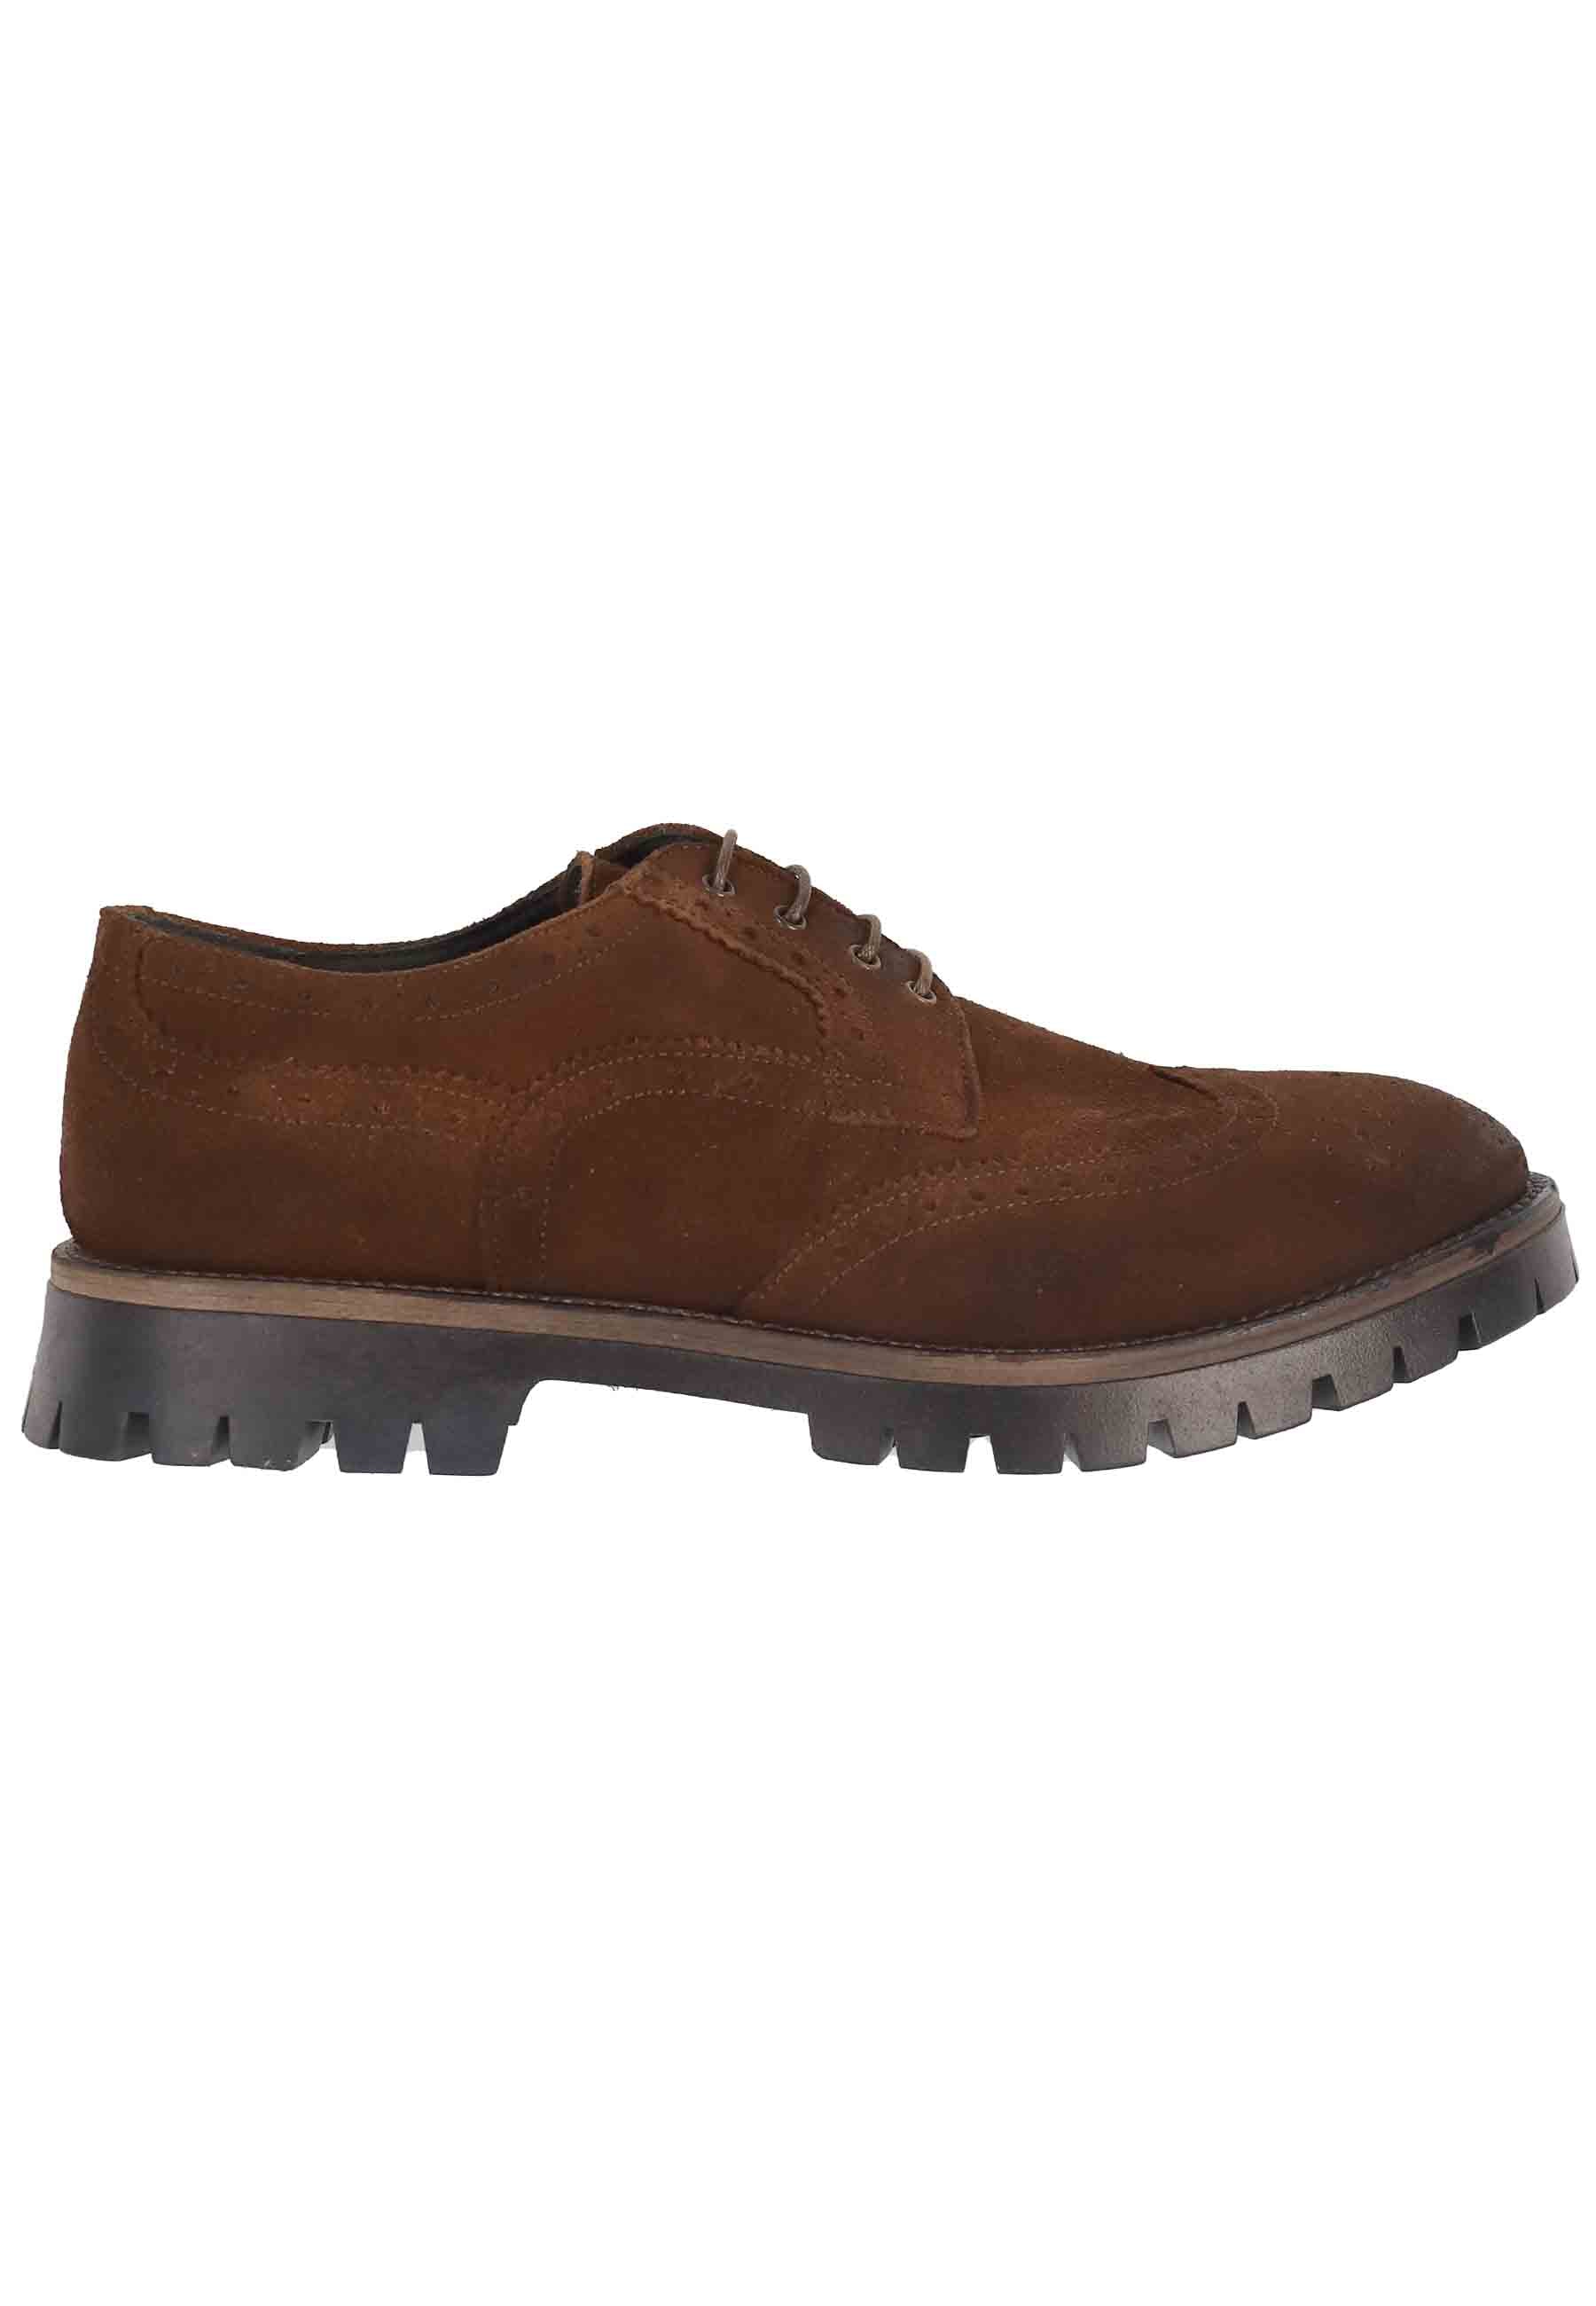 Men's lace-ups in leather suede with English stitching and lug sole